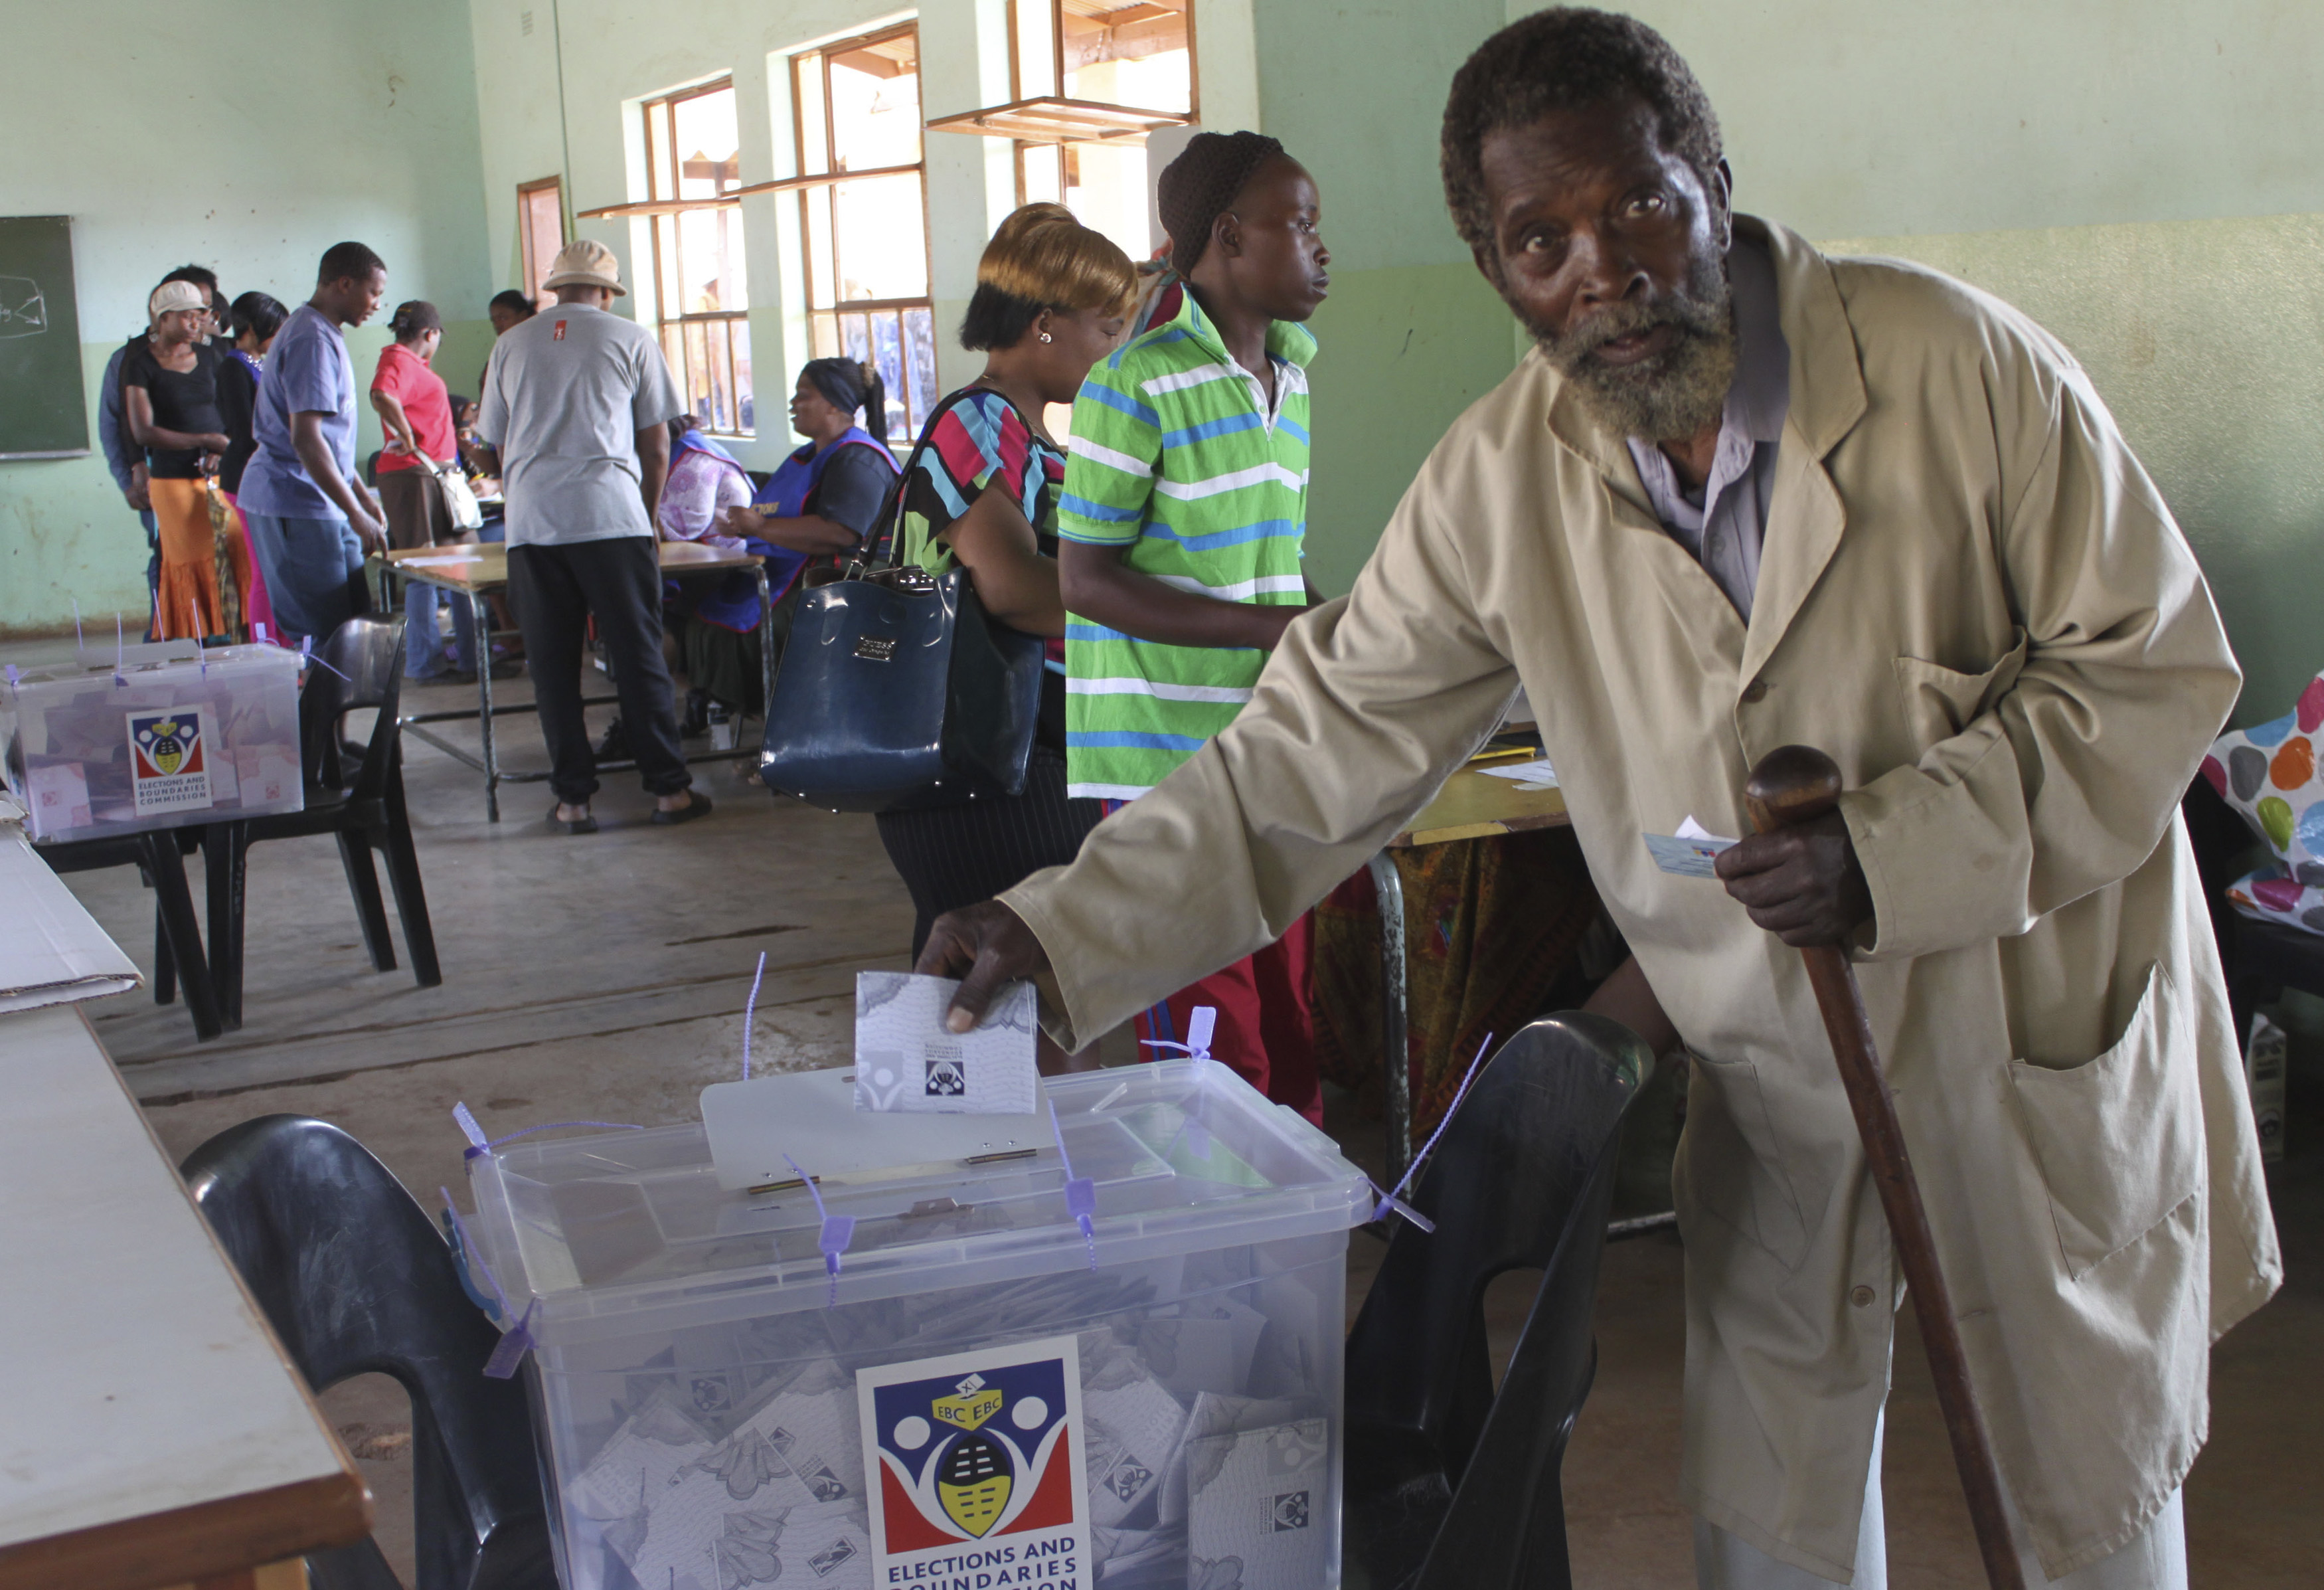 A voter casts his ballot at a voting station in Nhlangano, Swaziland, on 20 September 2013.